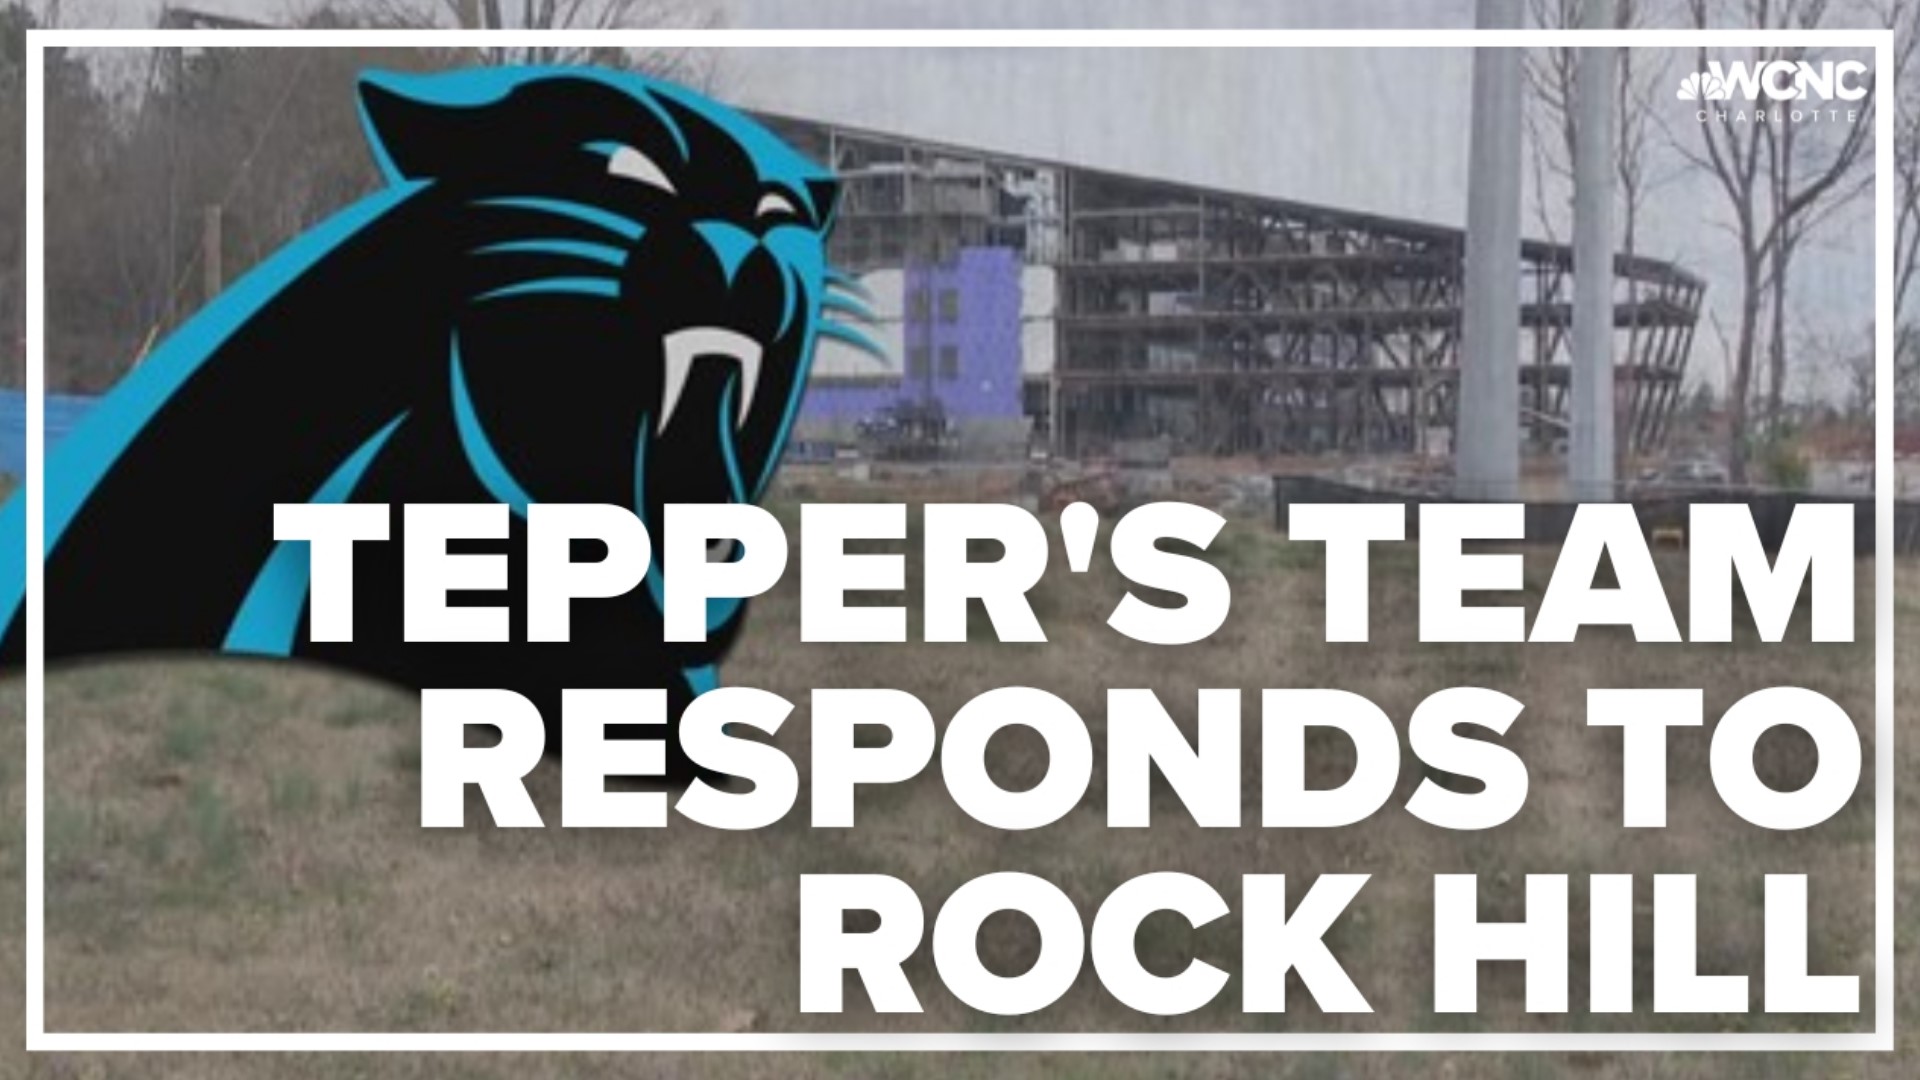 Thursday, Tepper's lawyers responded to the complaint filed by the city of Rock Hill saying the city's complaint is full of "false and incendiary allegations."